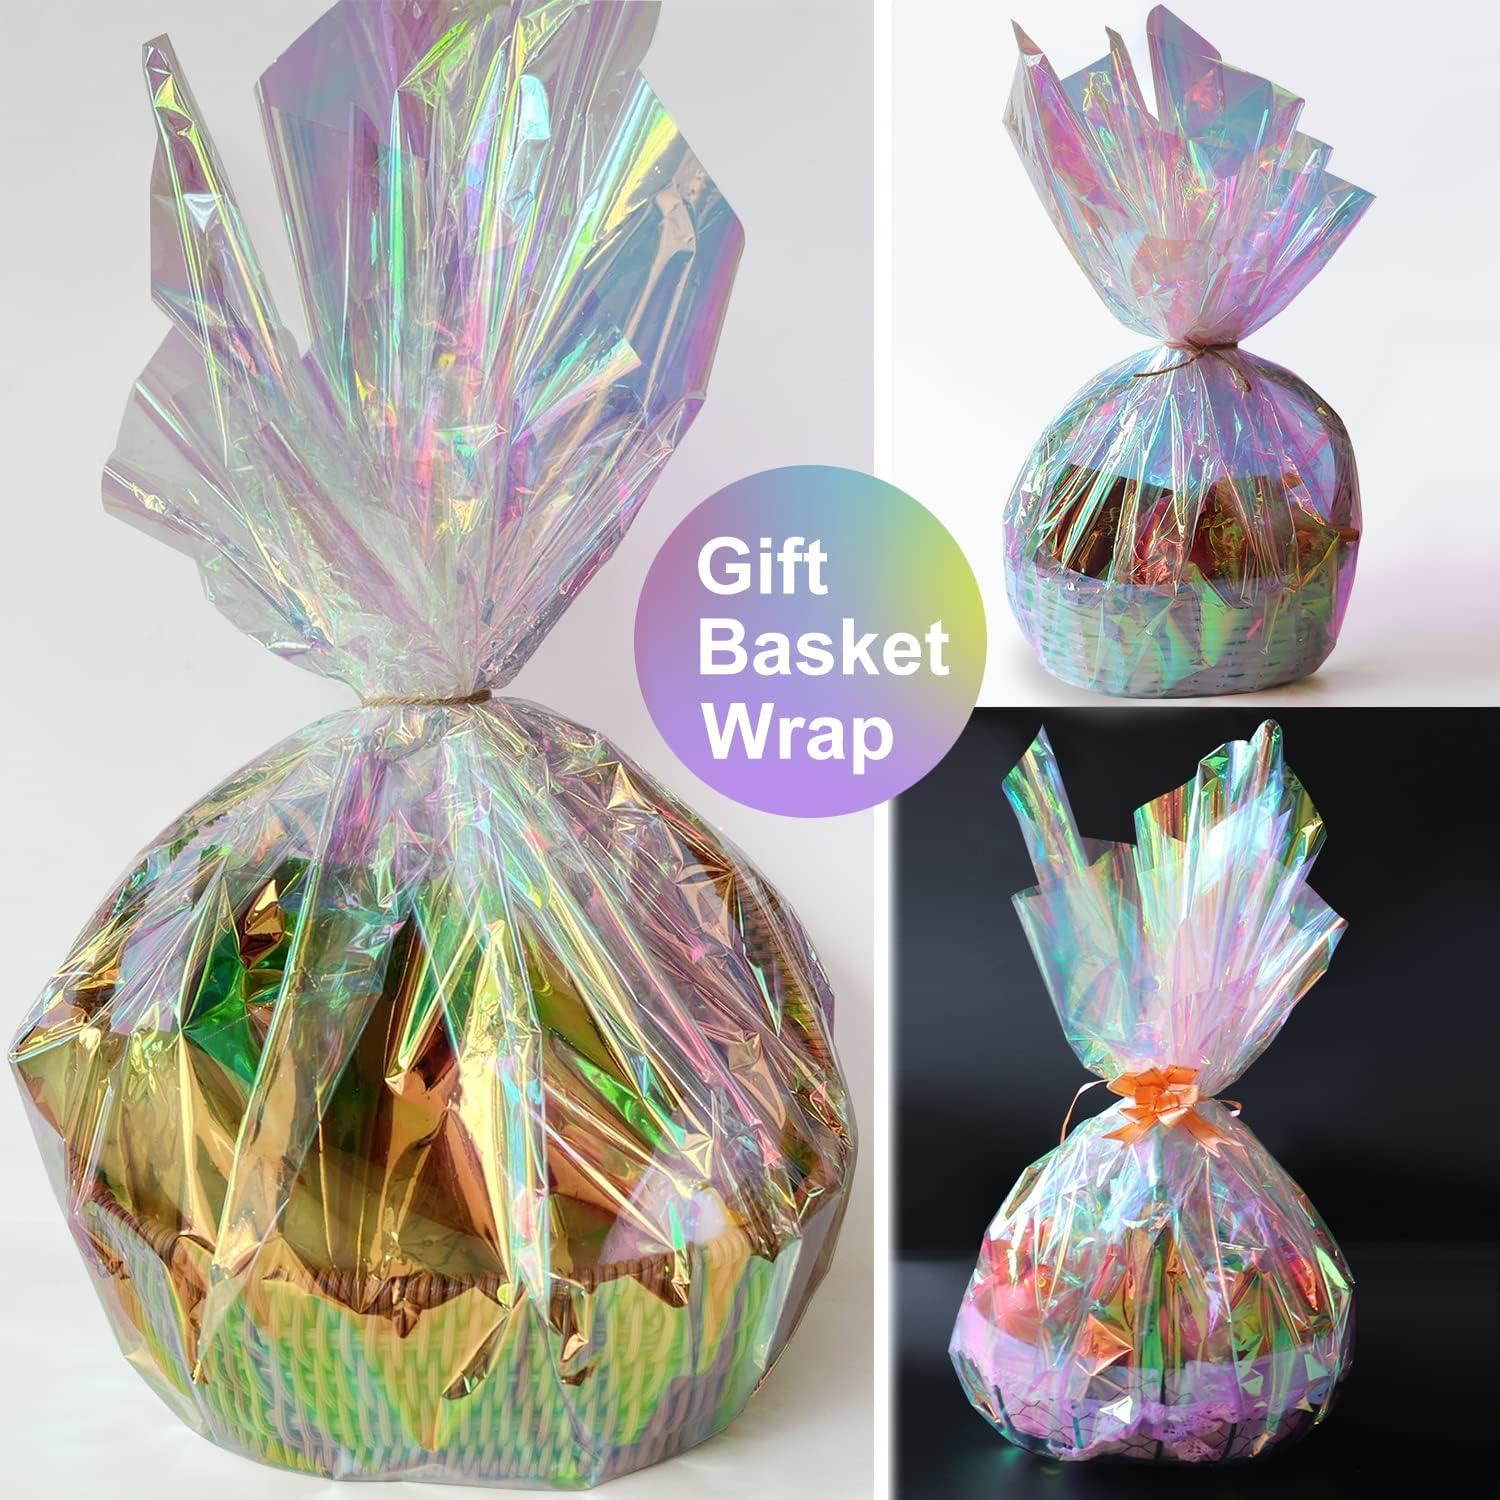 JOYIT Iridescent Cellophane Roll, Iridescent Wrapping Paper Cellophane Wrap  for Gift Baskets Iridescent Film for DIY Wrapping, Gift Baskets, Treats,  Gift, Flower, Crafts, Holiday, Christmas Decoration 